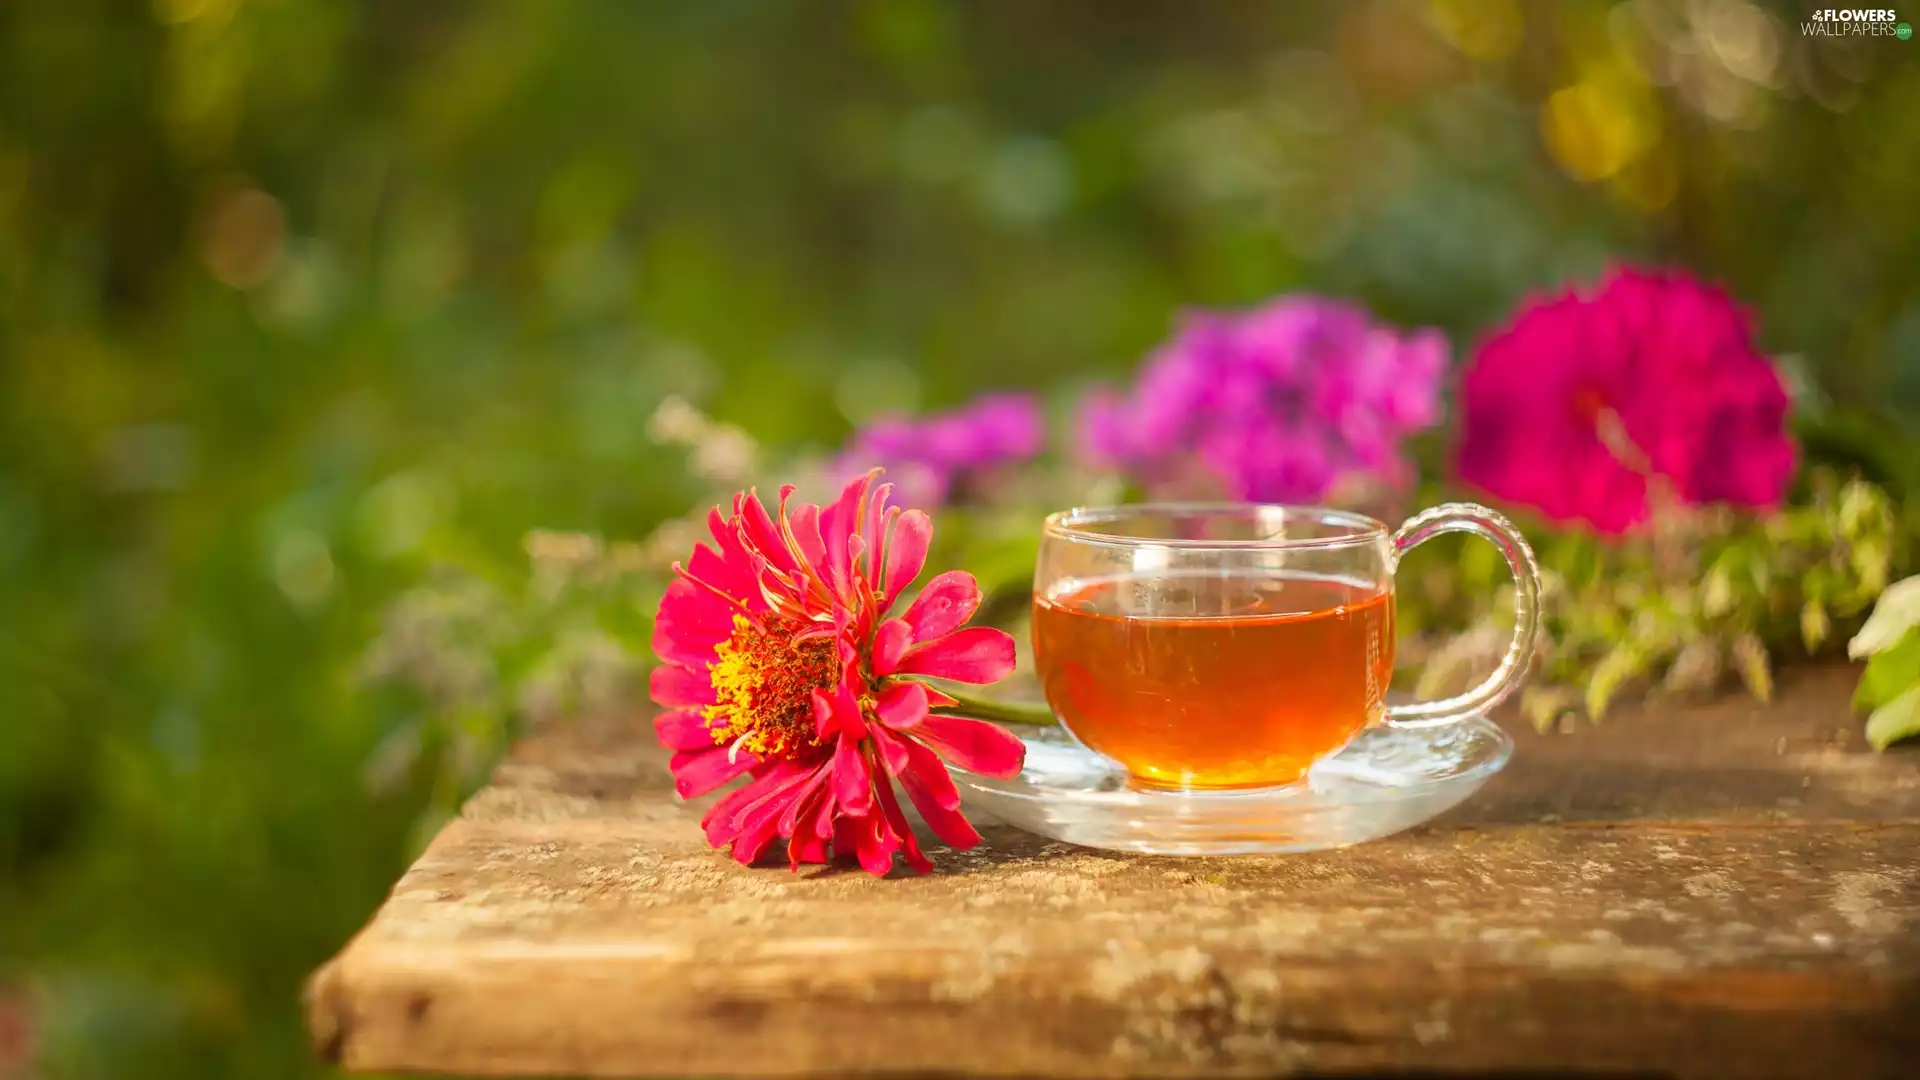 zinnia, blurry background, tea, Colourfull Flowers, cup